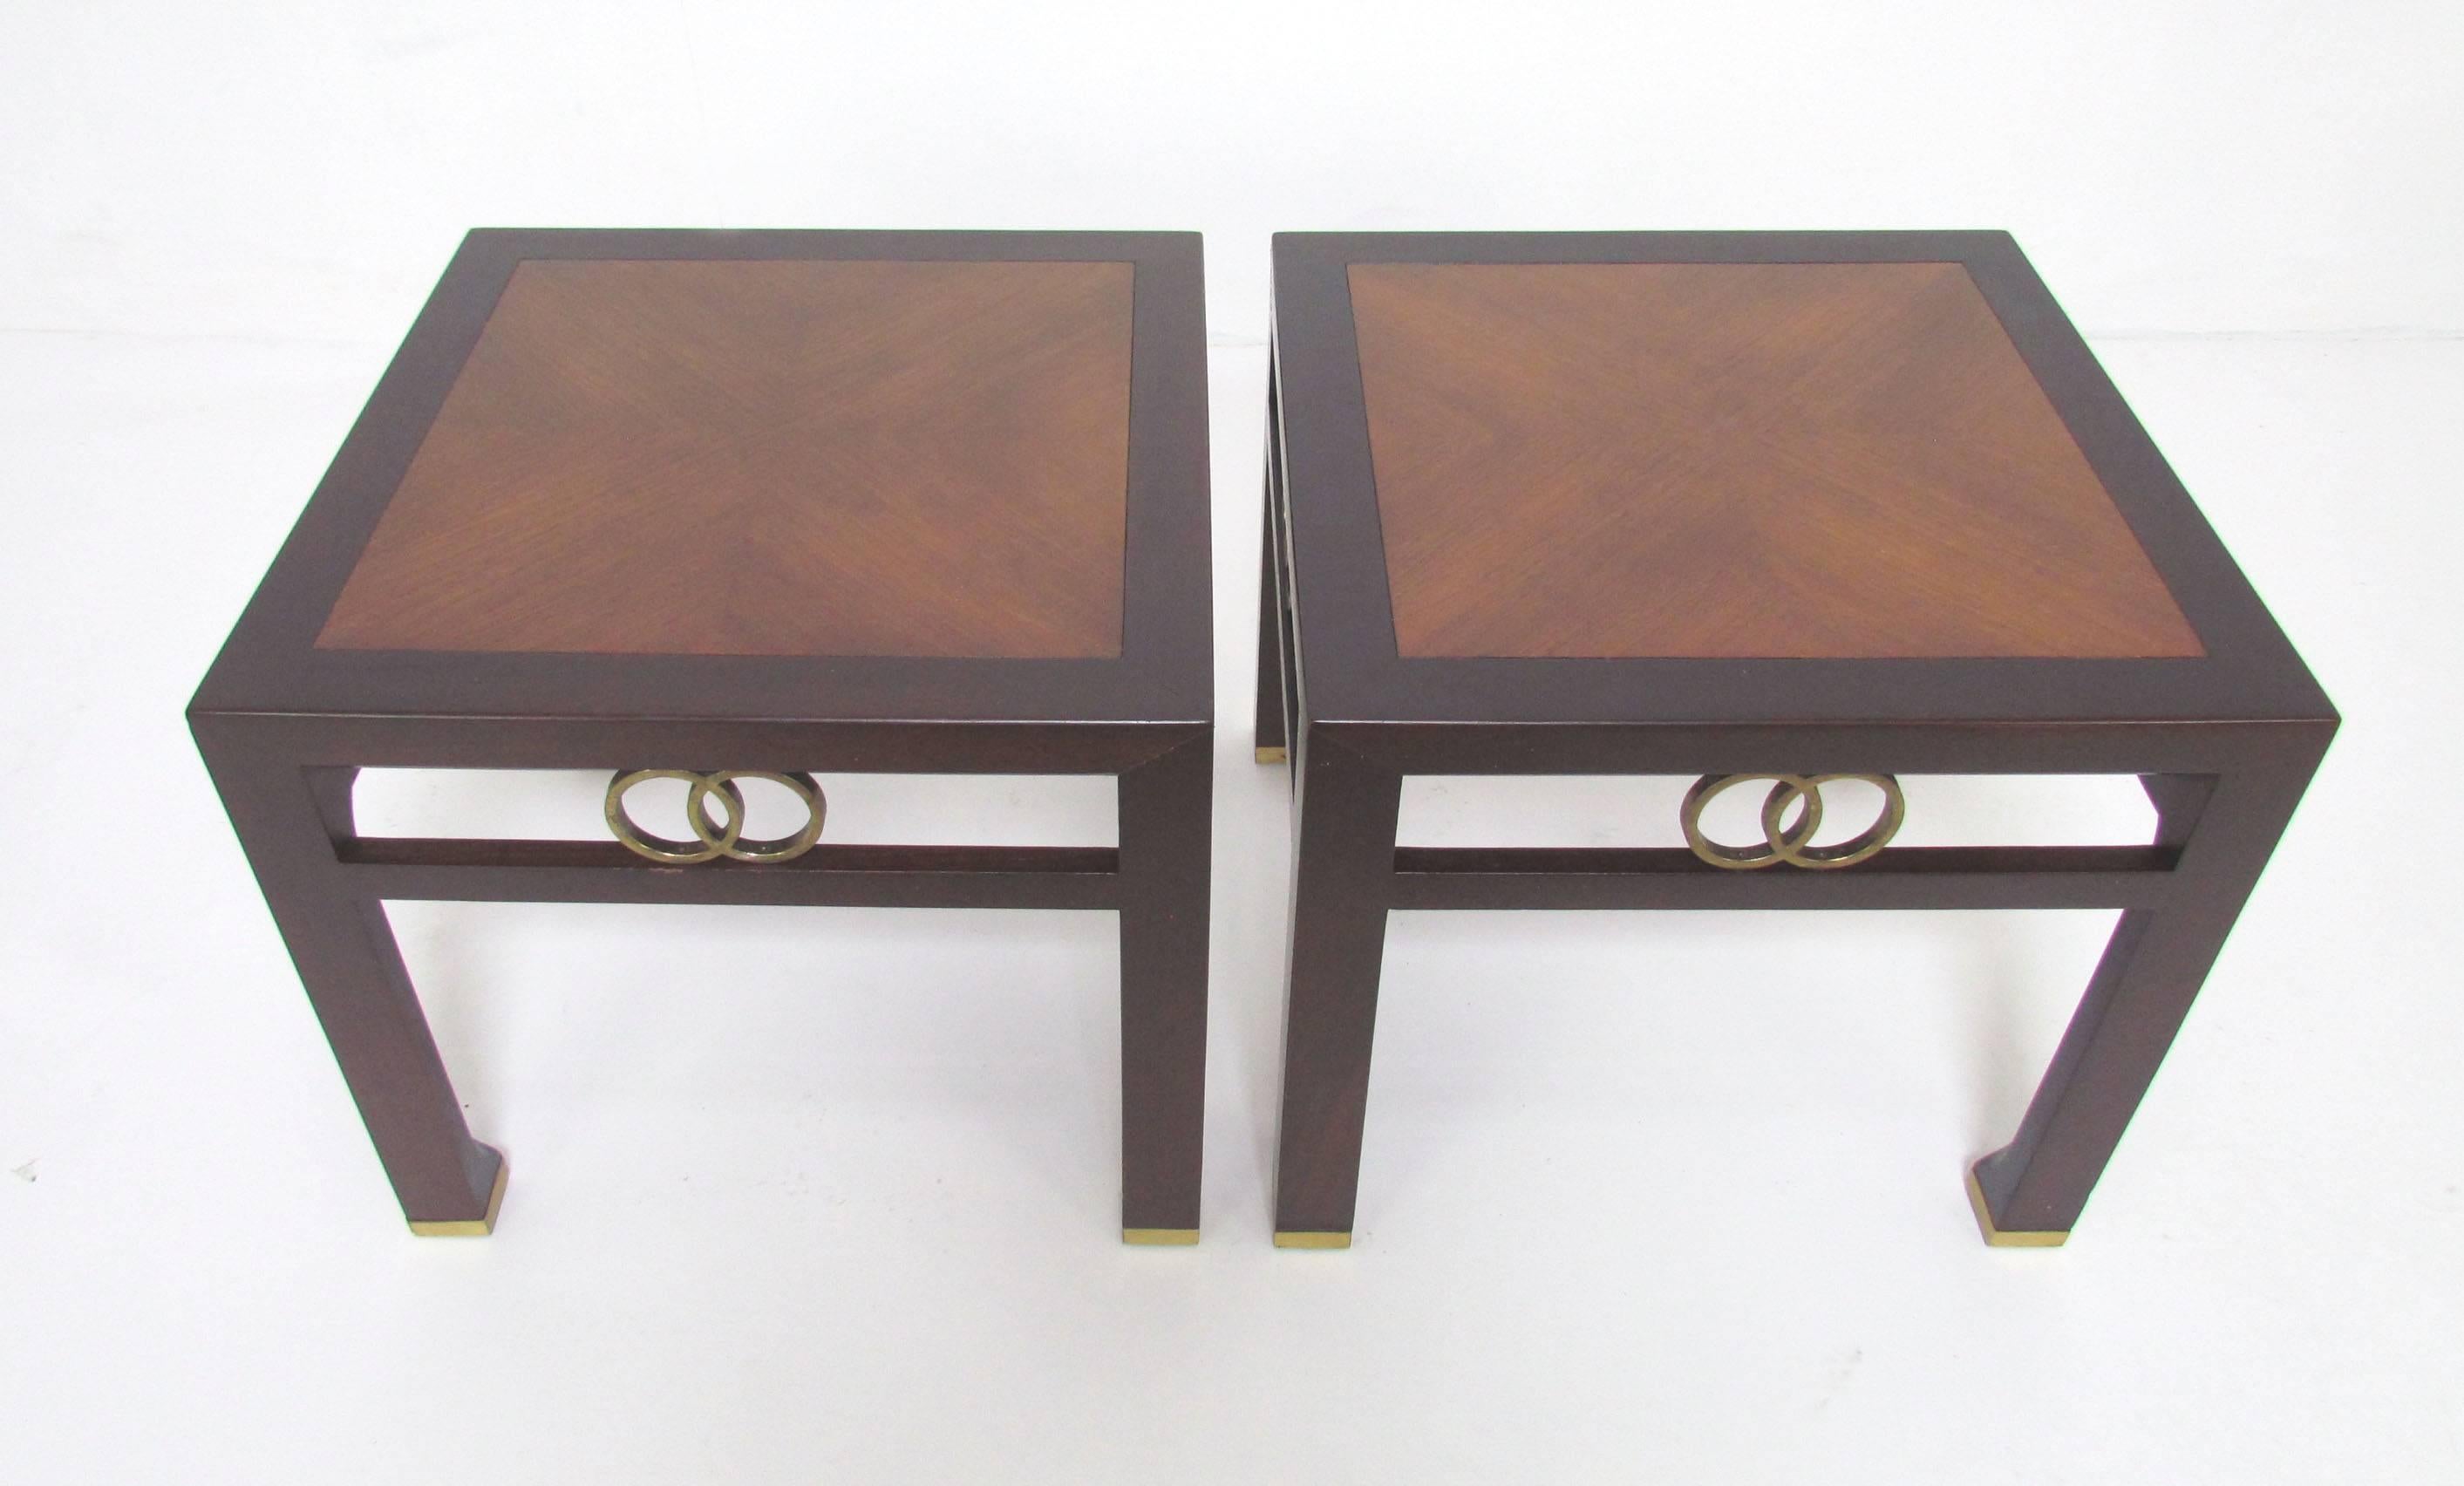 Pair of end tables designed by Michael Taylor for Baker Furniture, circa 1960s. Decorative brass interlocking rings and leg sabots. Elegant cross grain top set off by a dark mahogany frame.